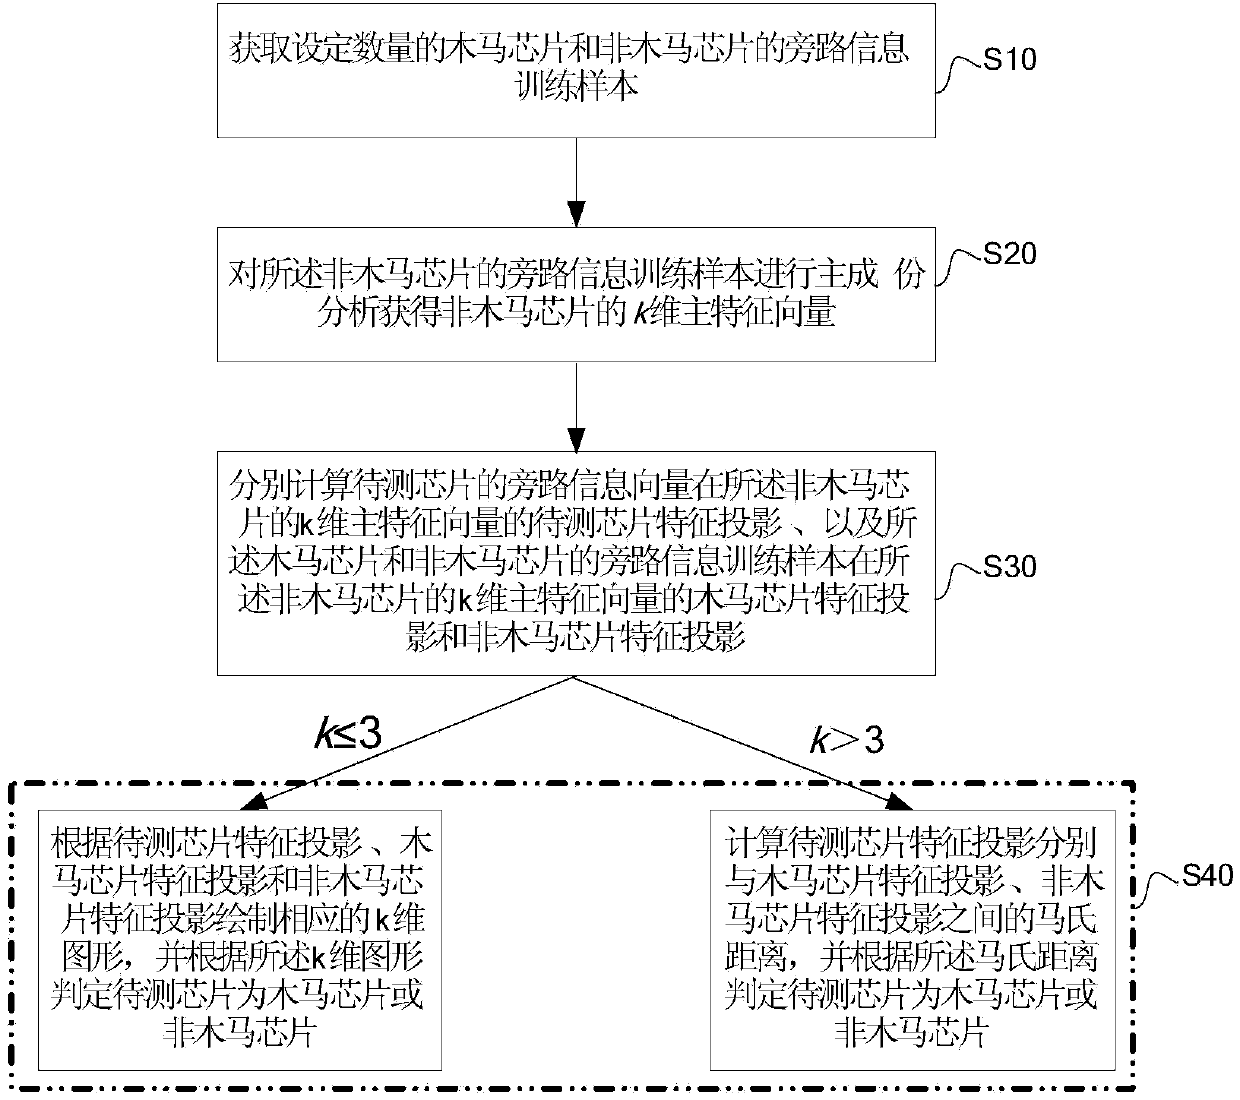 Integrated circuit hardware Trojan horse detection method and system